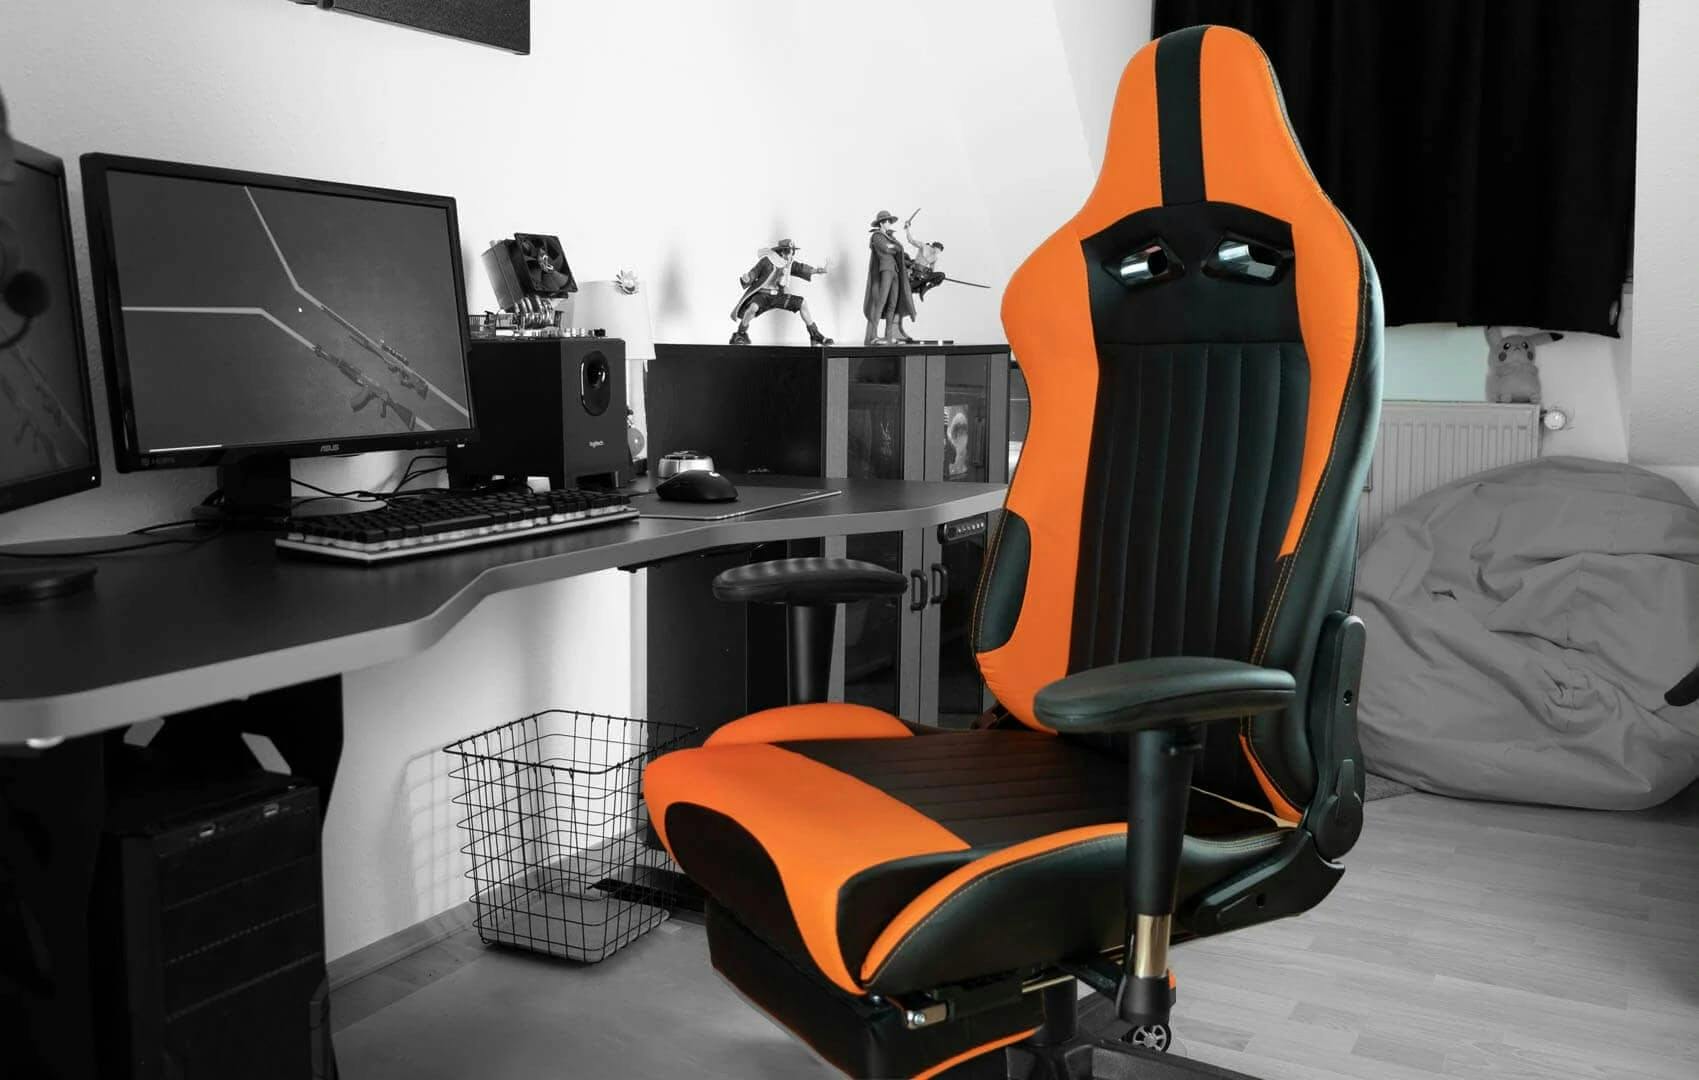 Gaming chair guide - What you need to know before buying